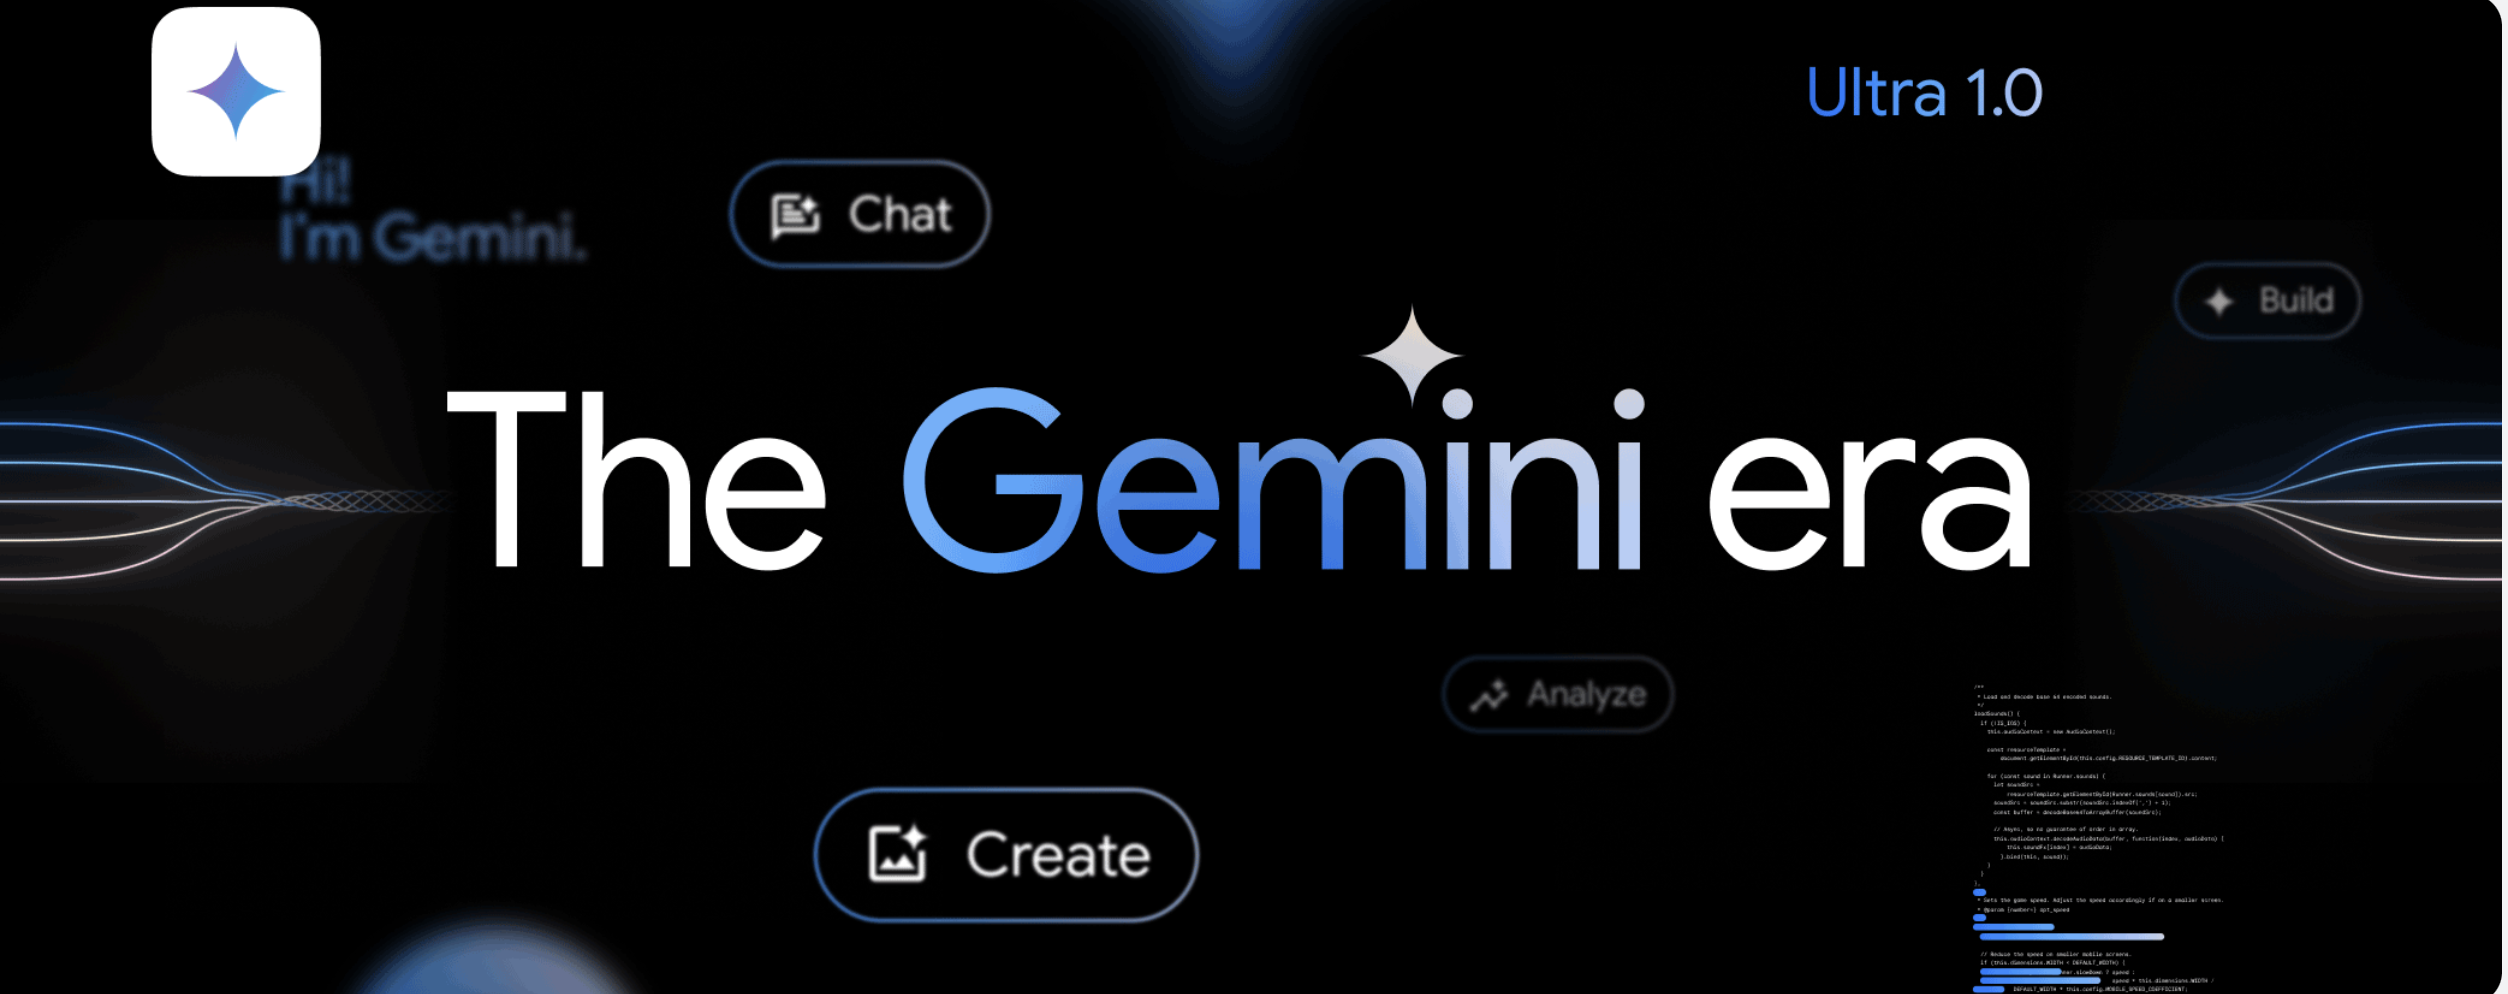 https://timesofindia.indiatimes.com/gadgets-news/google-faces-criticism-for-gemini-ai-being-woke-heres-what-the-company-has-to-say/articleshow/107906151.cms